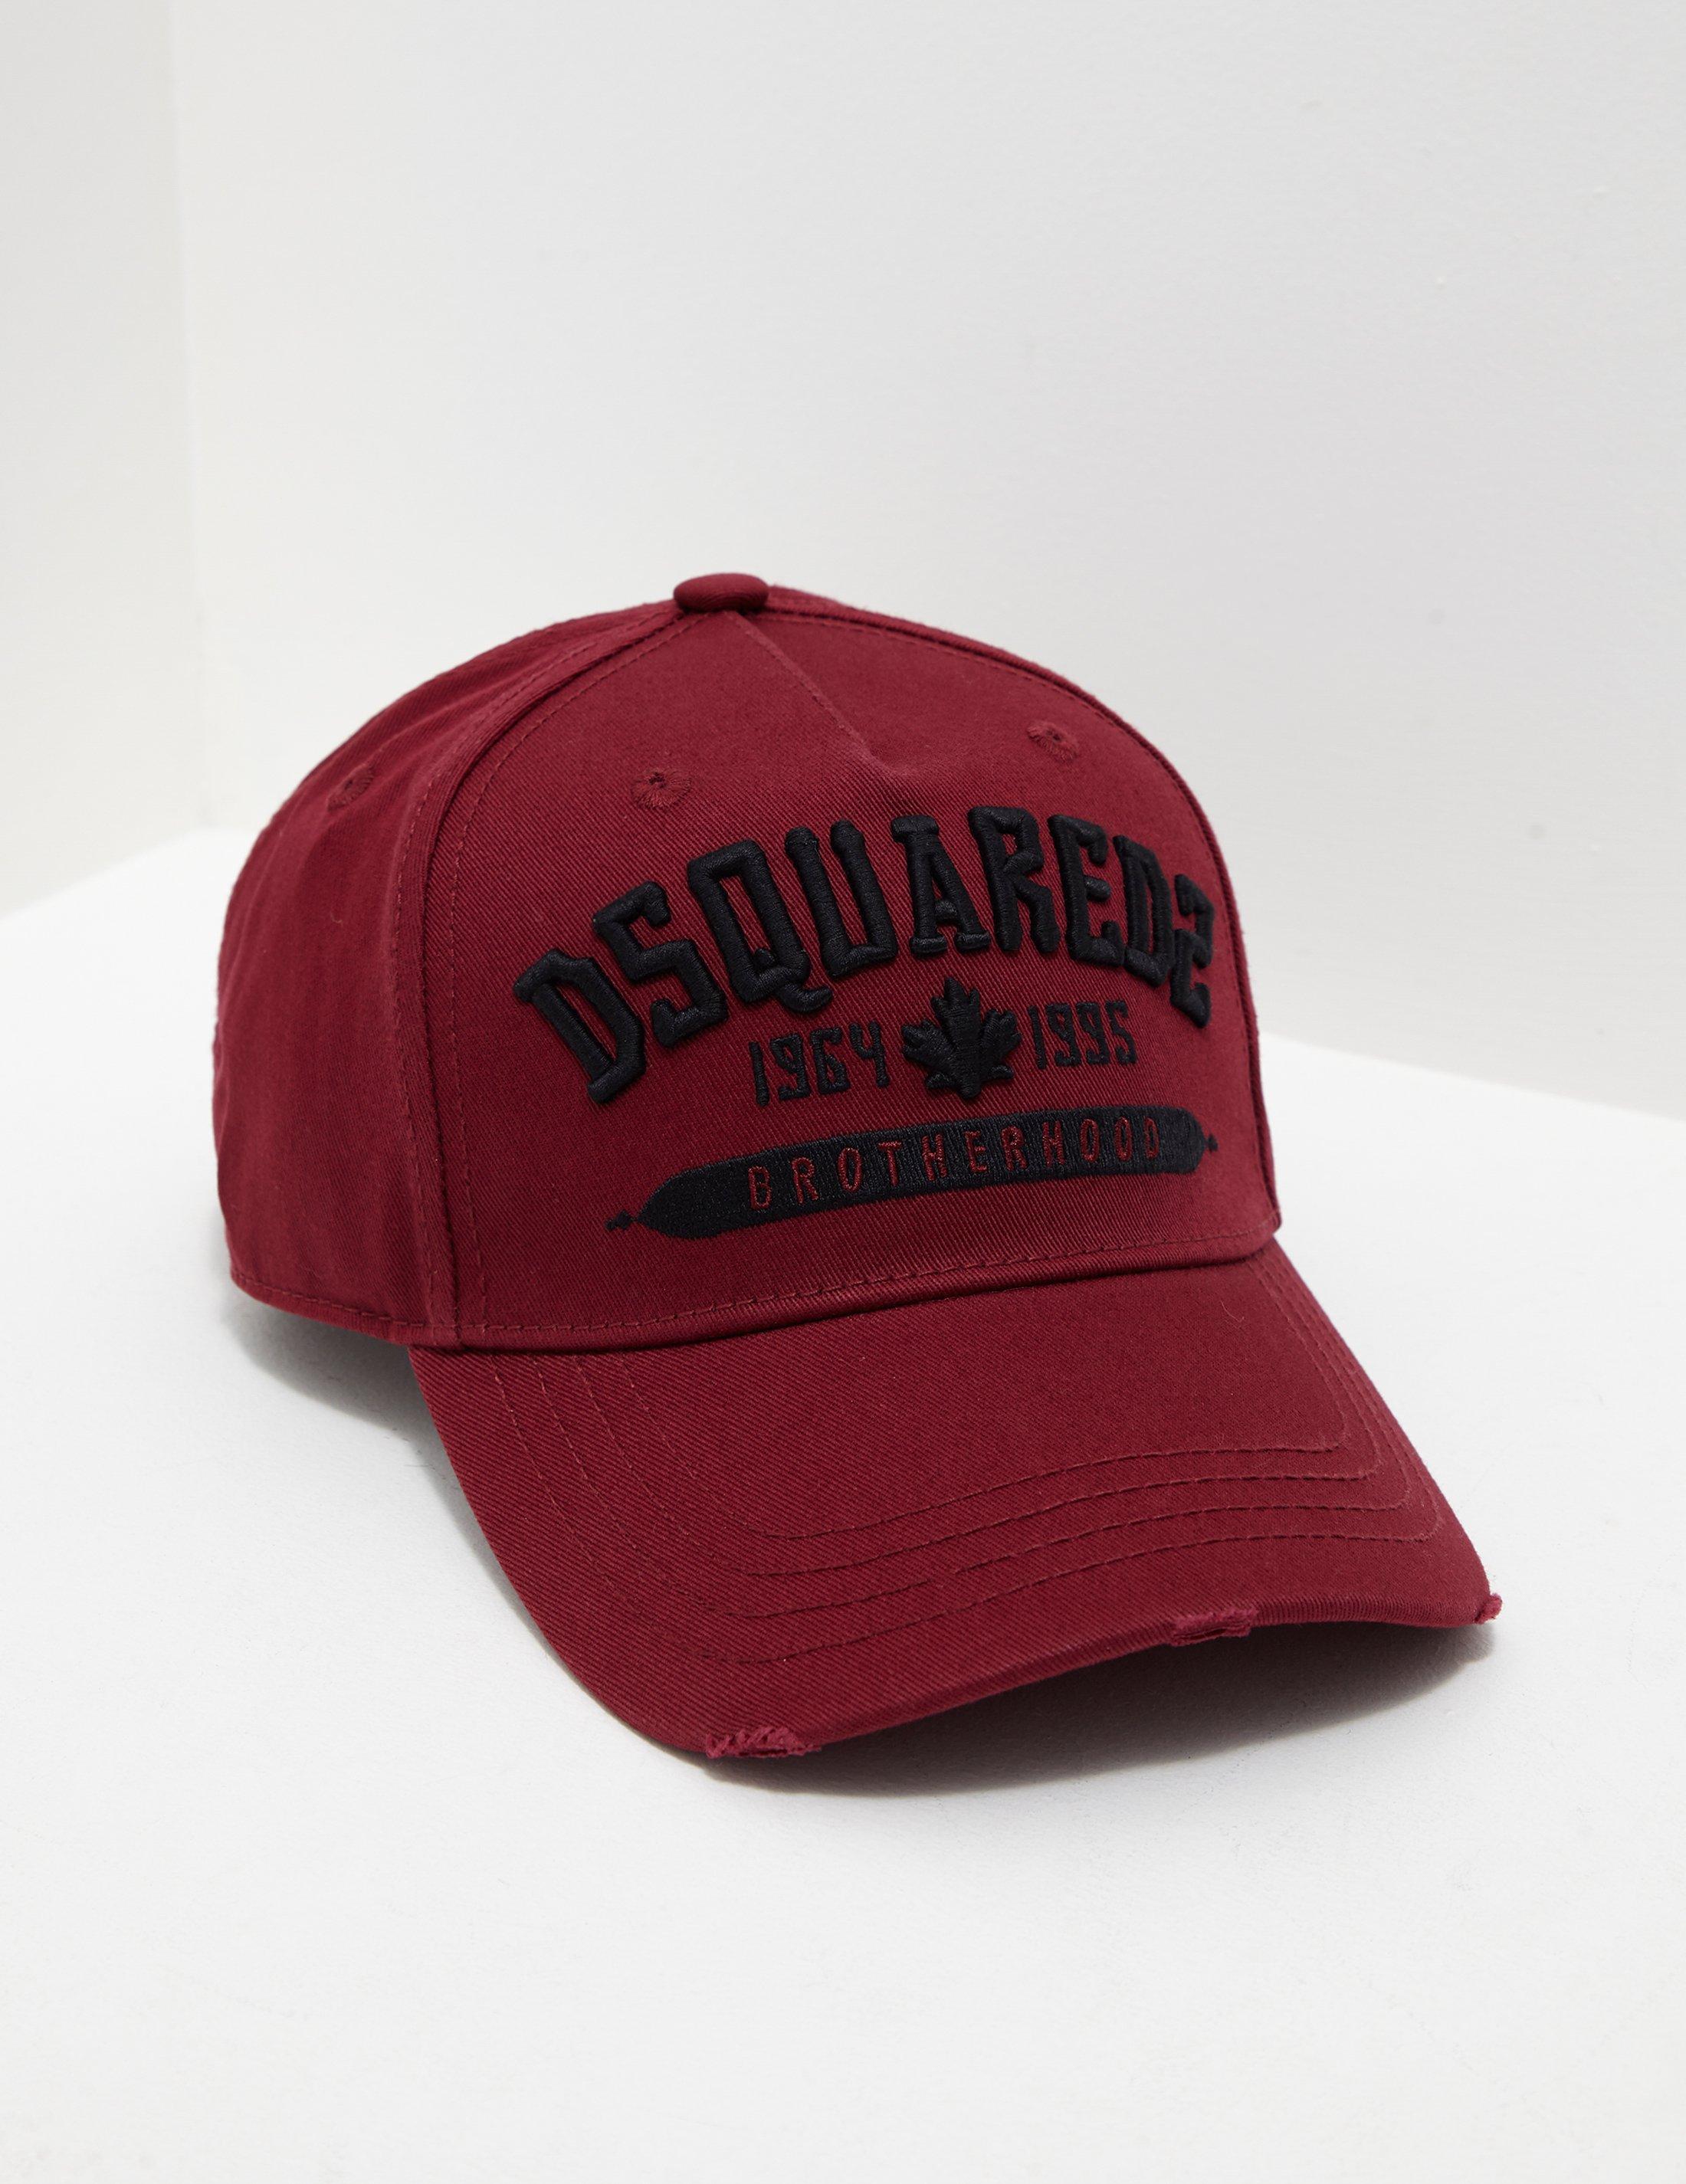 dsquared2 cap black and red